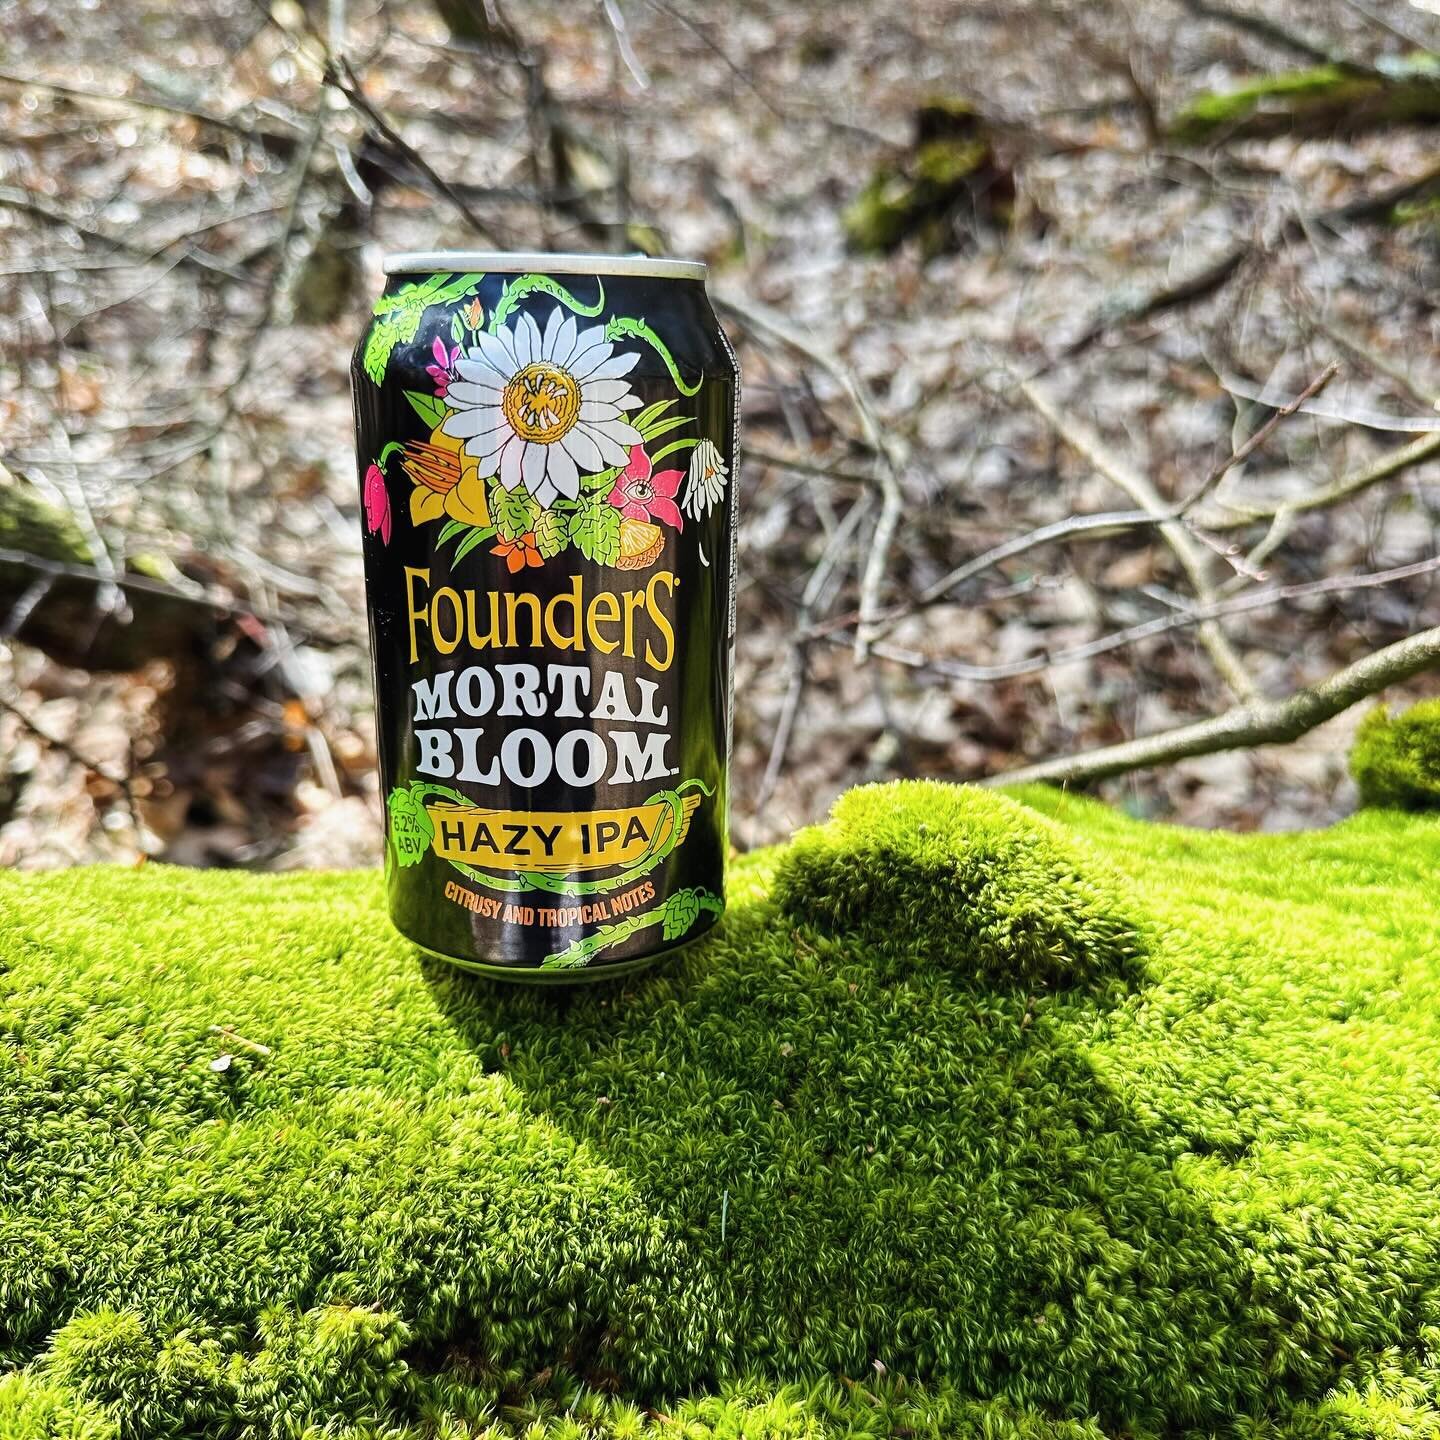 We love @foundersbrewing &rsquo;s new brew: Mortal Bloom!
Let every sip remind us of the beauty in every end and hope in every beginning. 
Happy Easter from the Burial Forest! 
✨ Peter and Annica 

@foundersgrandrapids 

#MortalBloom #GreenBurial #Mi